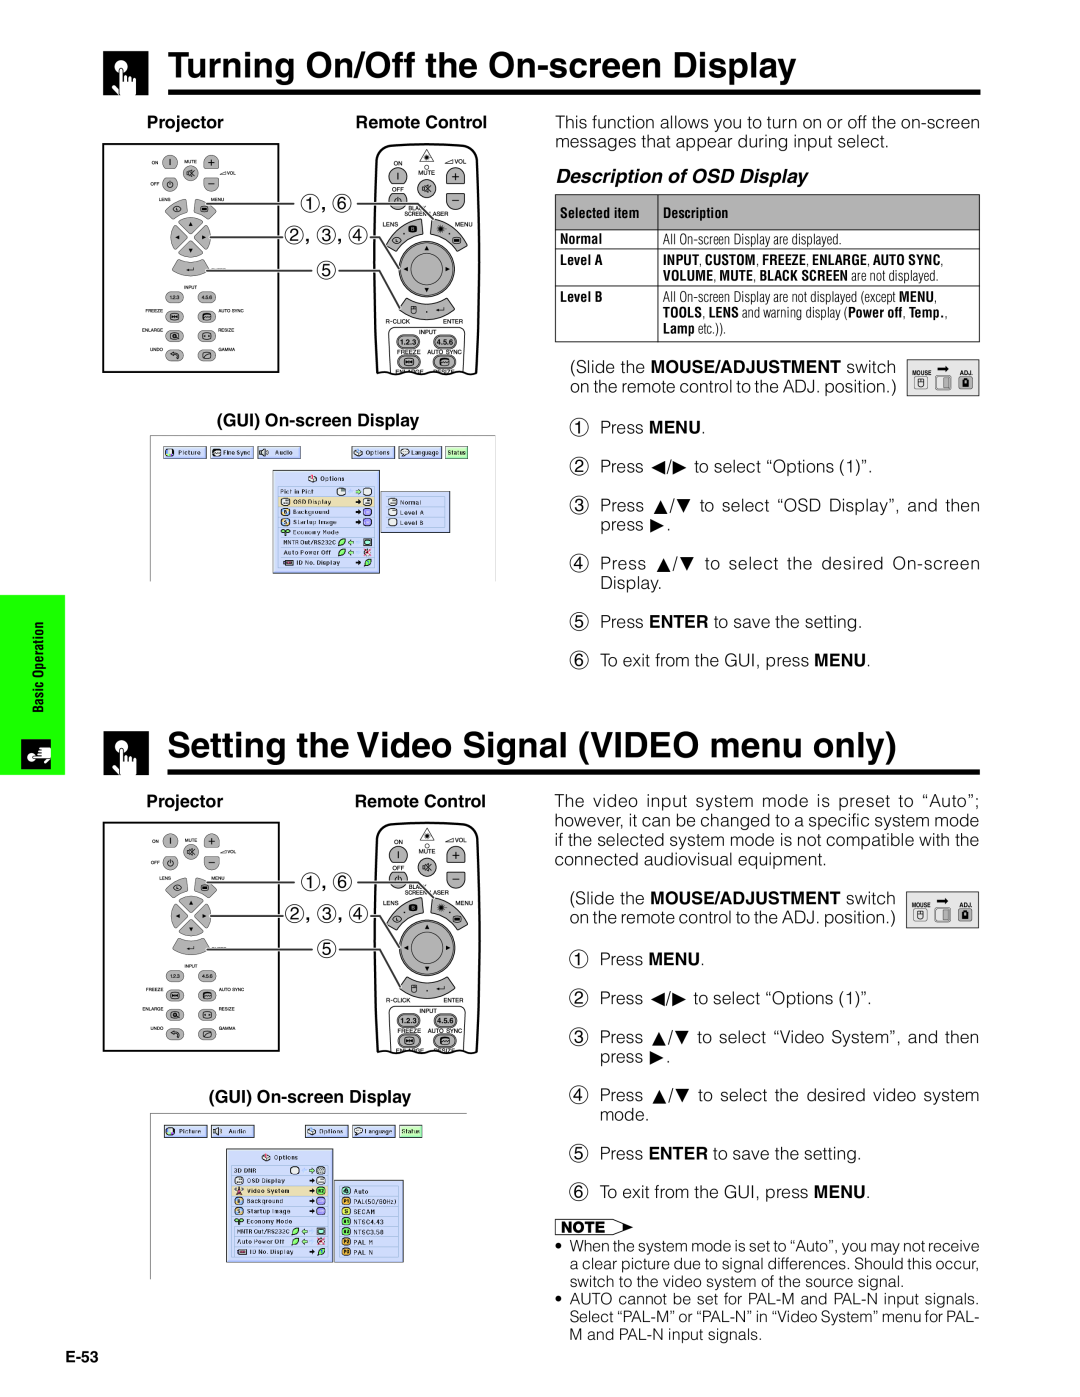 Sharp XG-V10XU Turning On/Off the On-screen Display, Setting the Video Signal VIDEO menu only, Description of OSD Display 